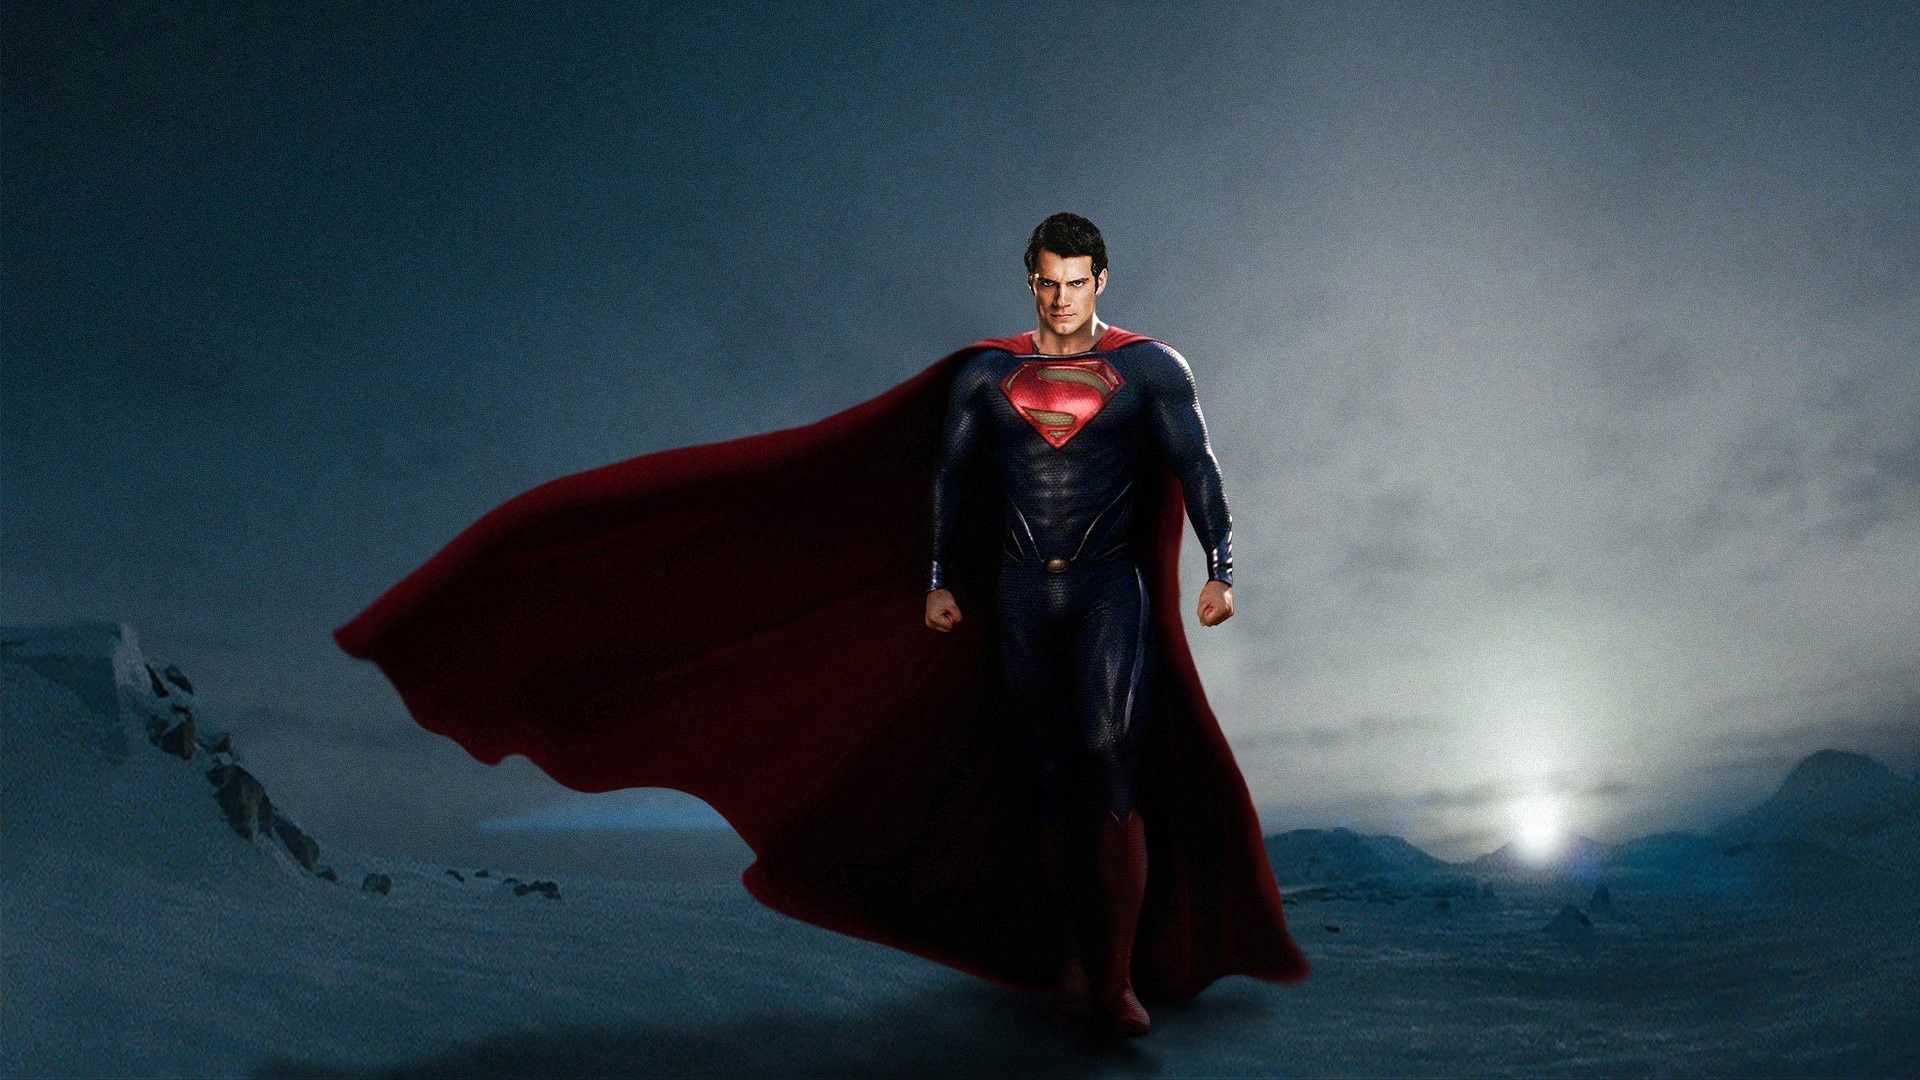 Superman in Man of Steel Wallpapers HD Backgrounds